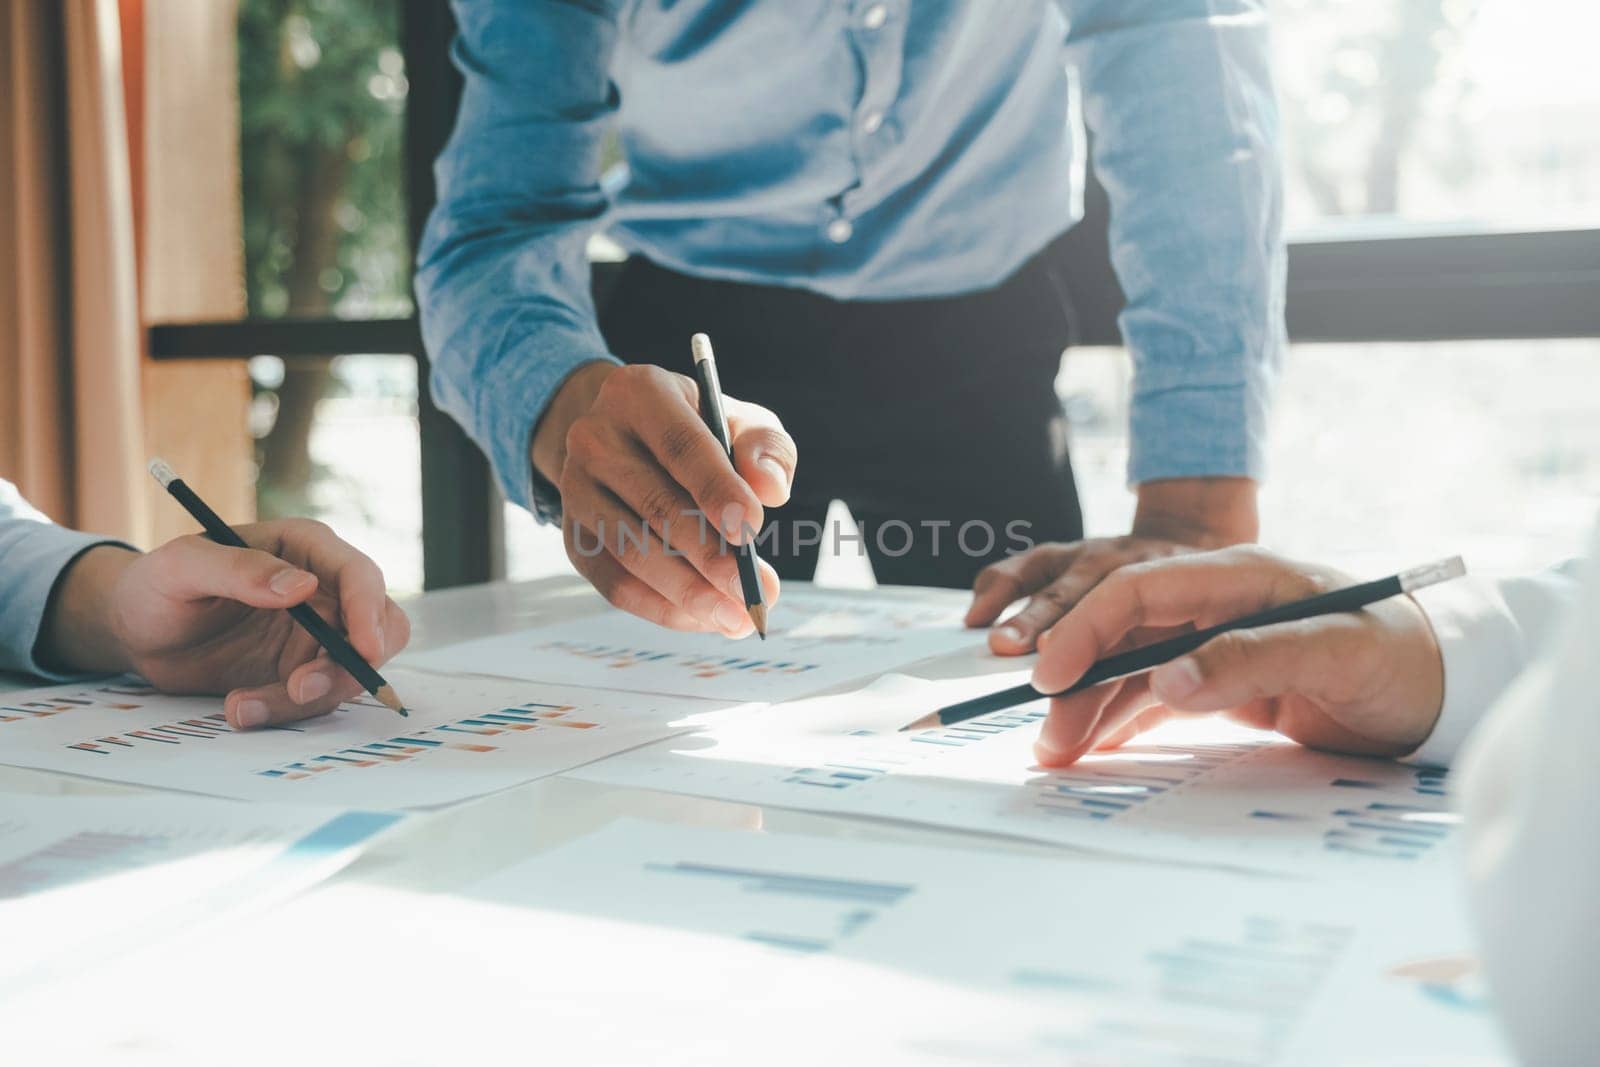 Close-up of businessmen working together at workplace, discussing about strategies, plans, analytic progress, and financial stats, and pointing at graph documents on desk holding pencils. Business and Teamwork concept.